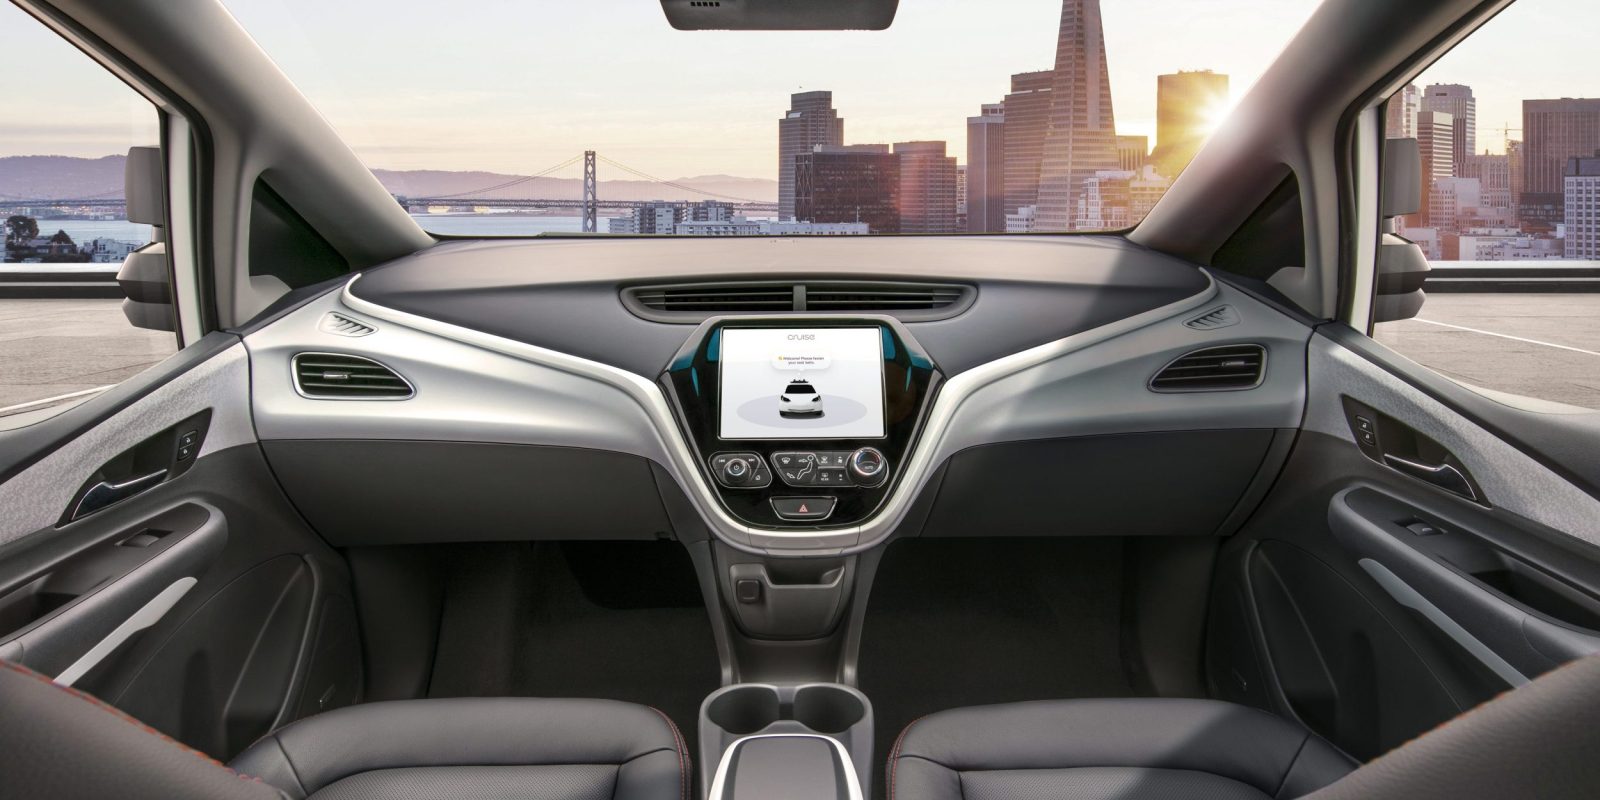 GM Cruise gets greenlight to operate true driverless Chevy Bolt EVs